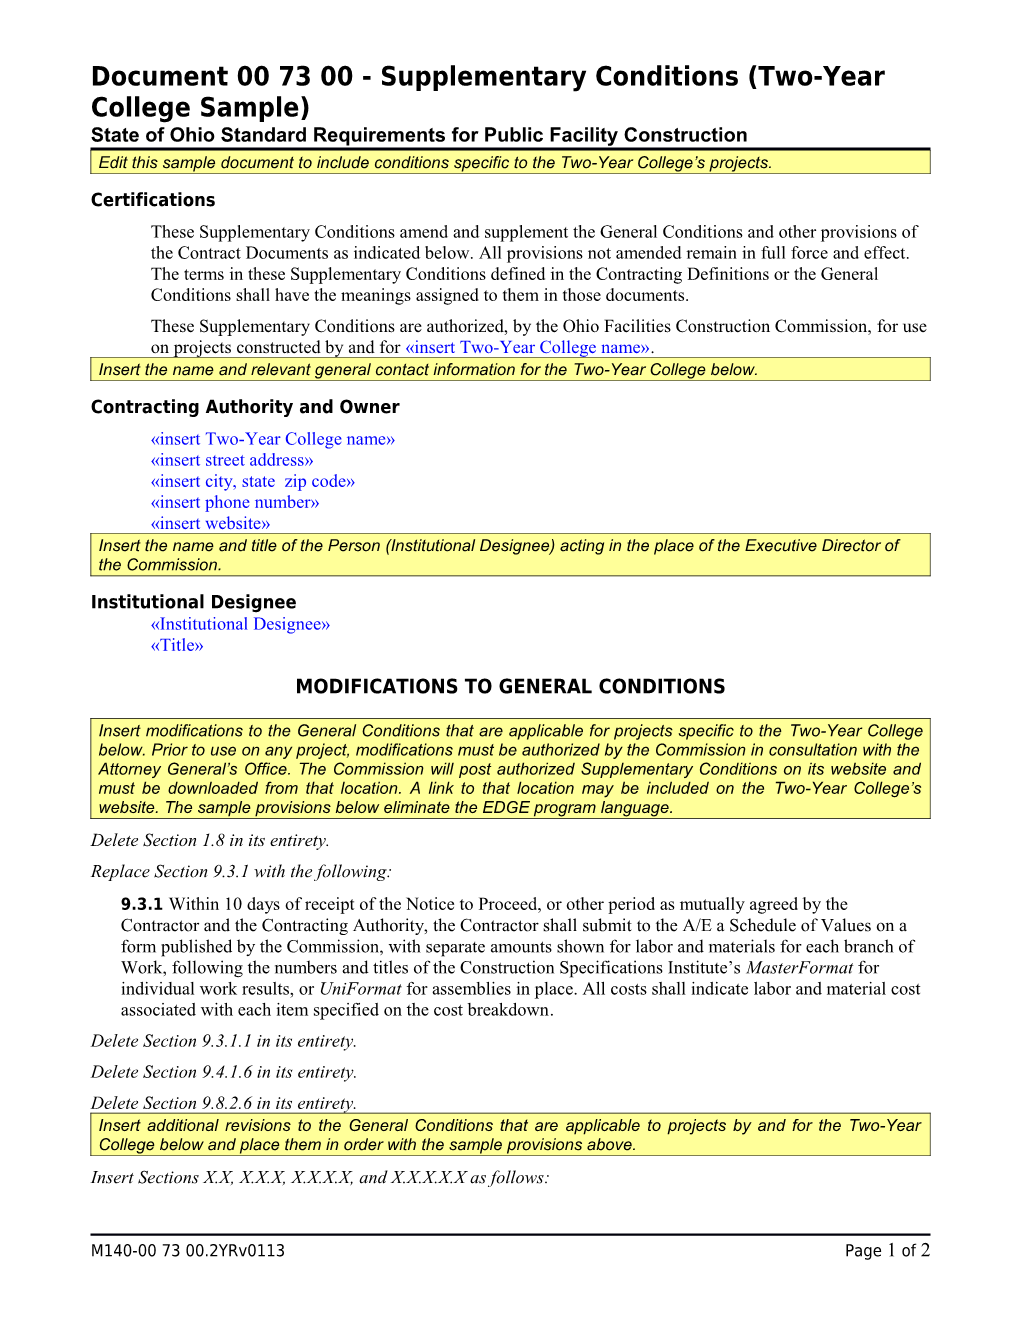 Document 007300Supplementary Conditions (Two-Year College Sample)